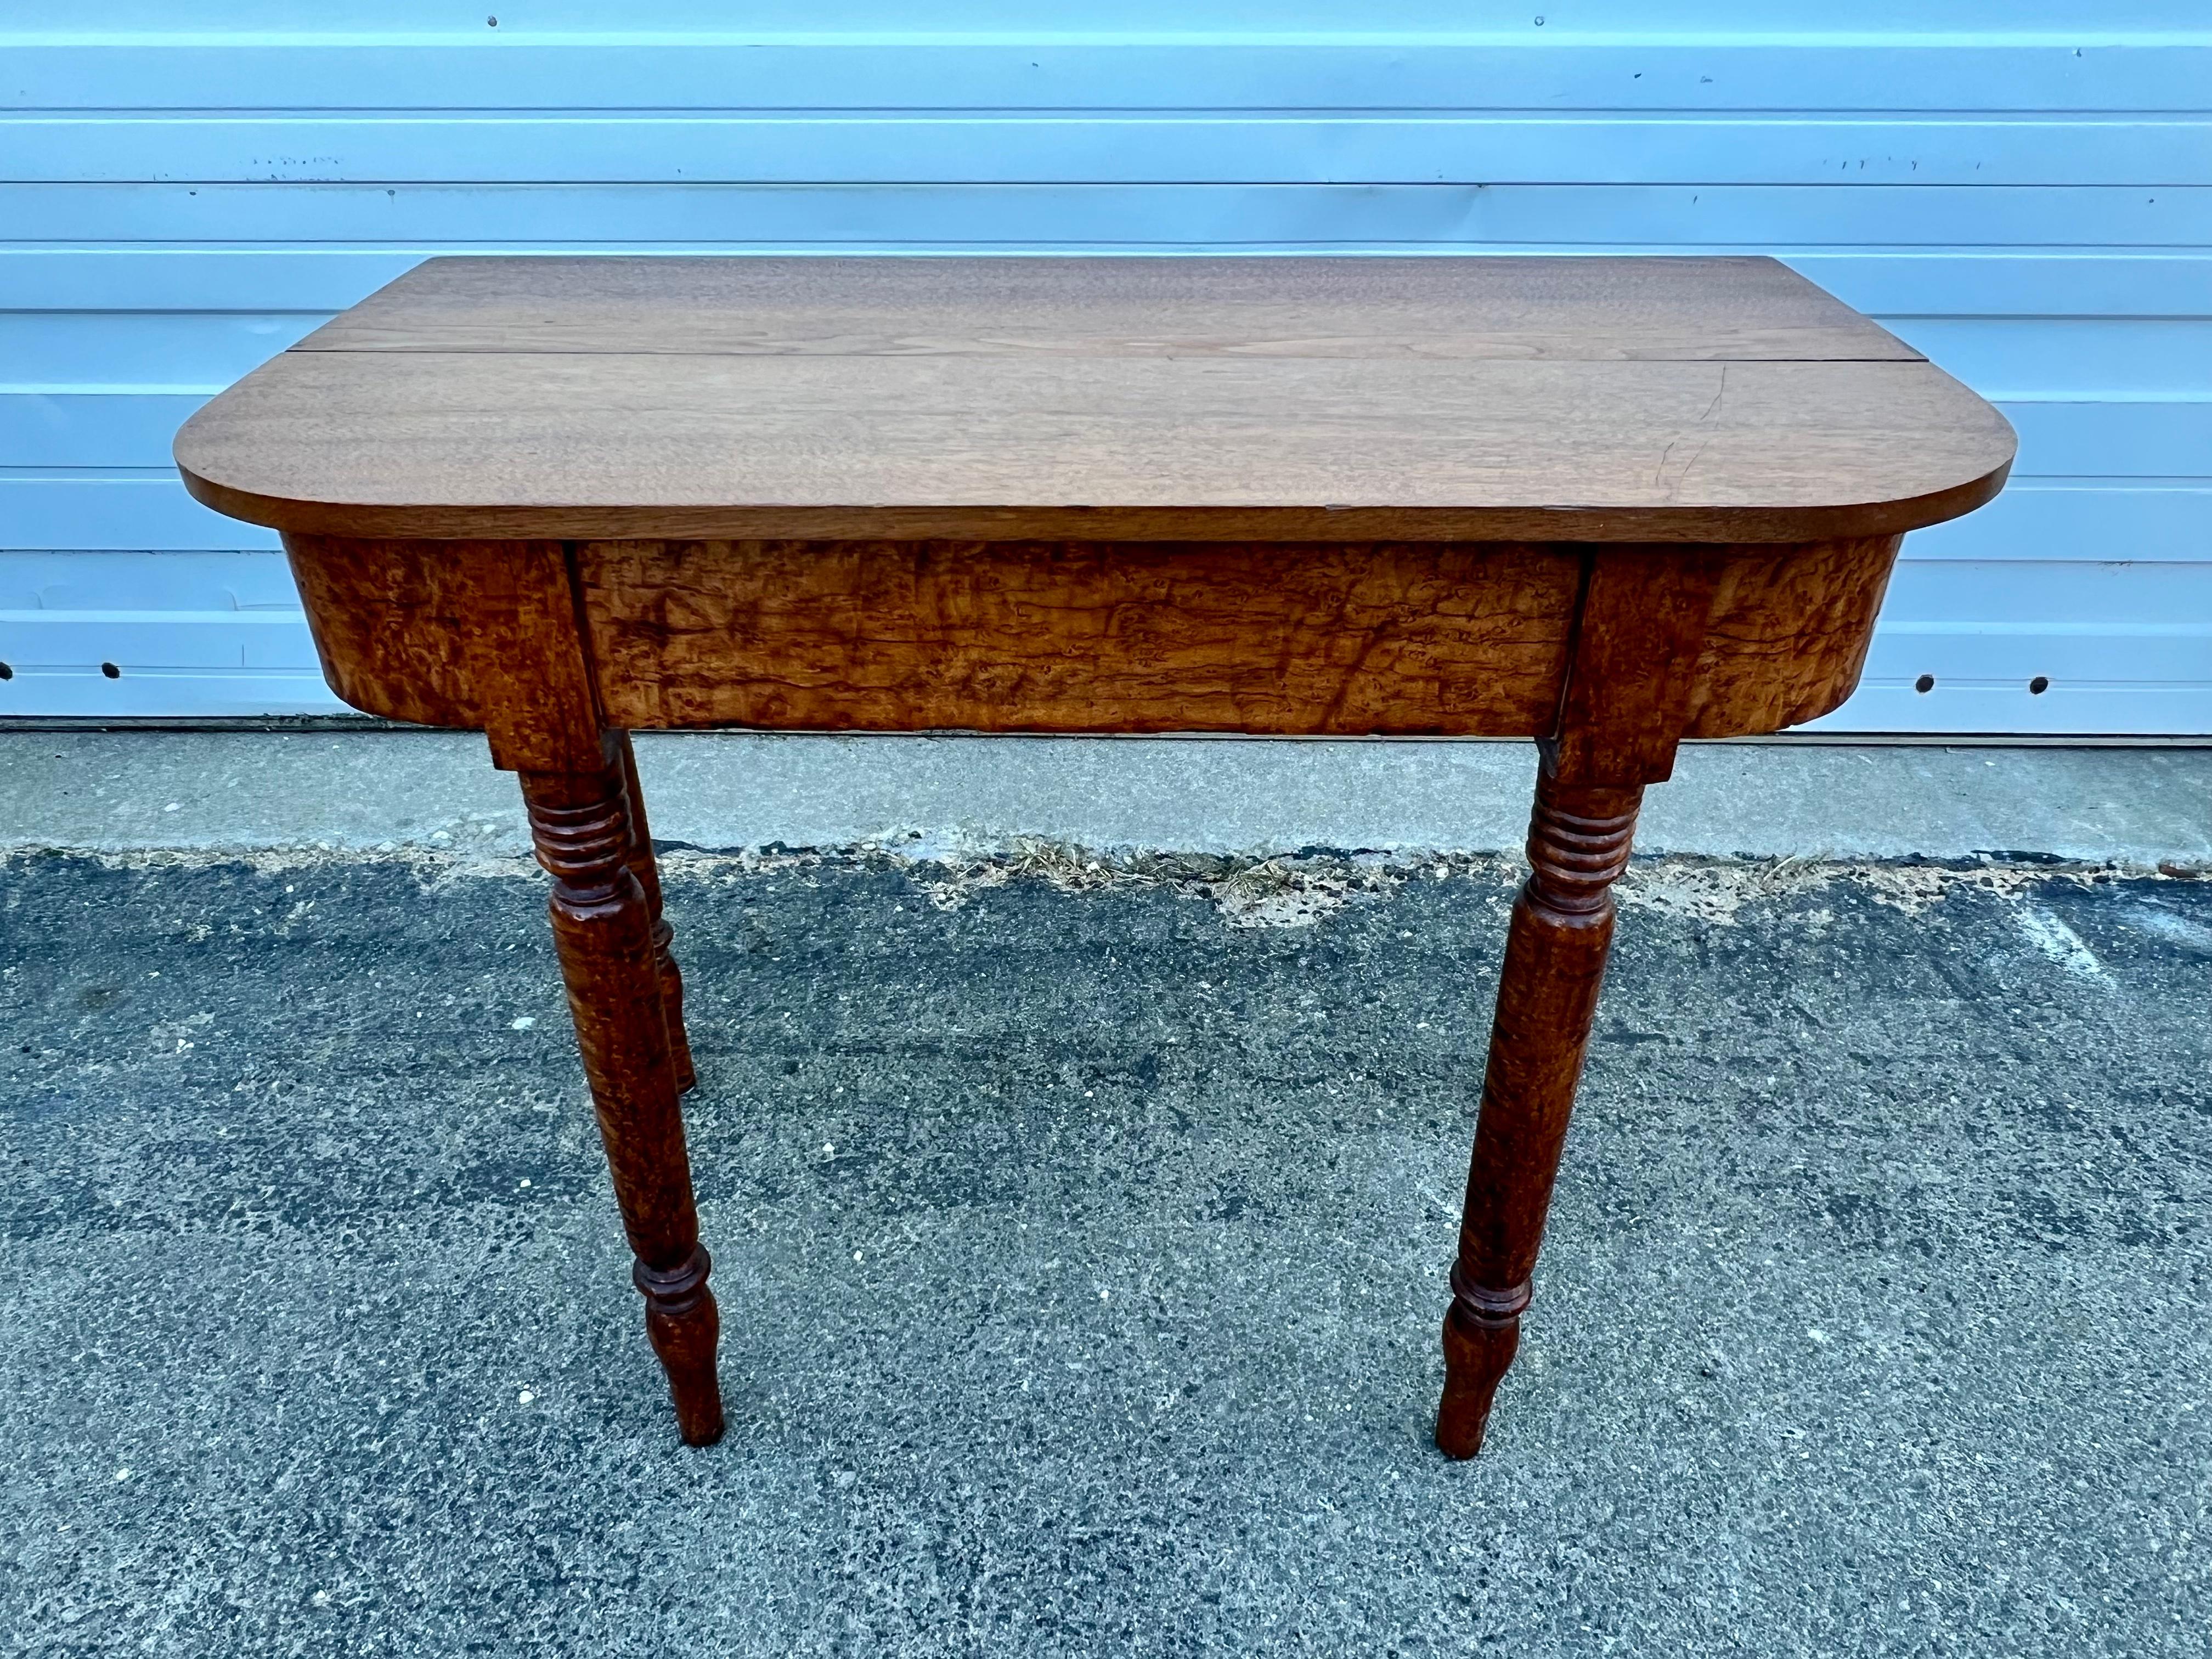 Lovely 19th century console table crafted from Birdseye maple.  Top with rounded front corners, on nicely turned legs.  